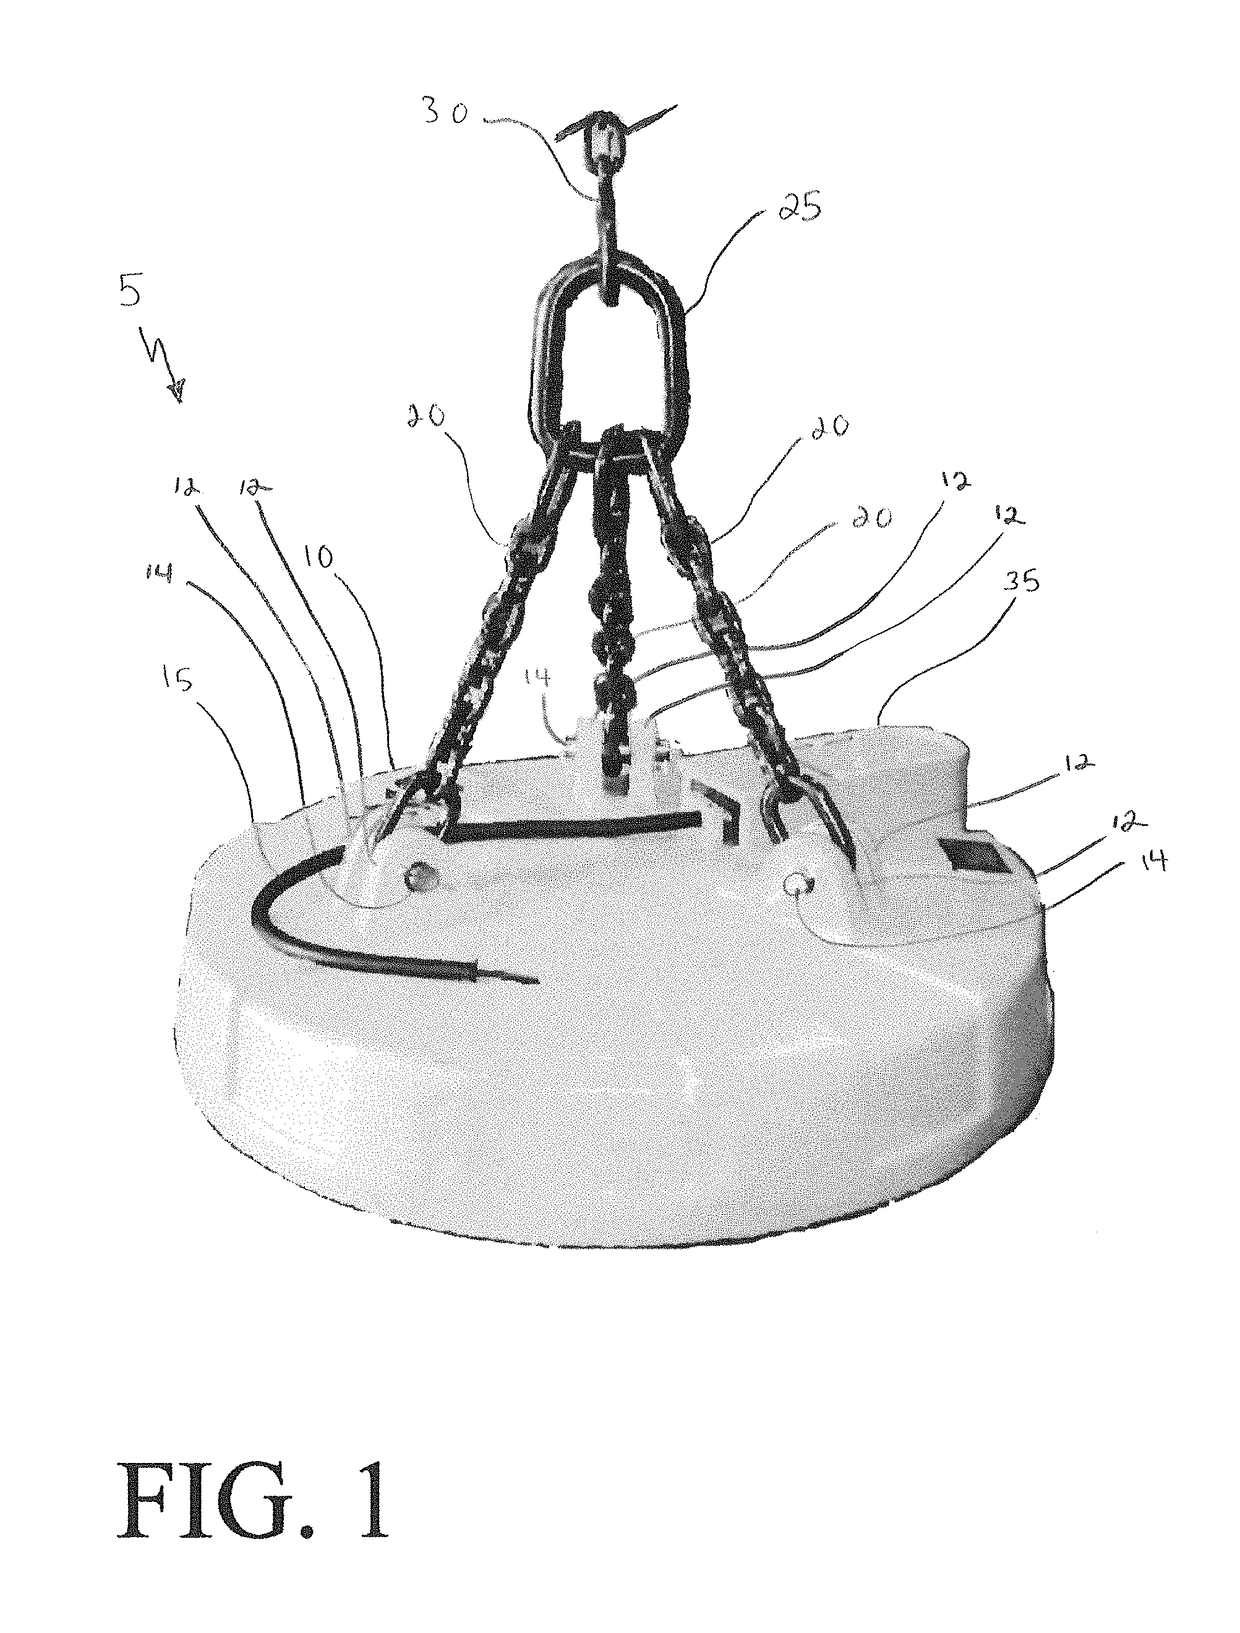 Protective component for power cable of an industrial electro-magnetic lifting device